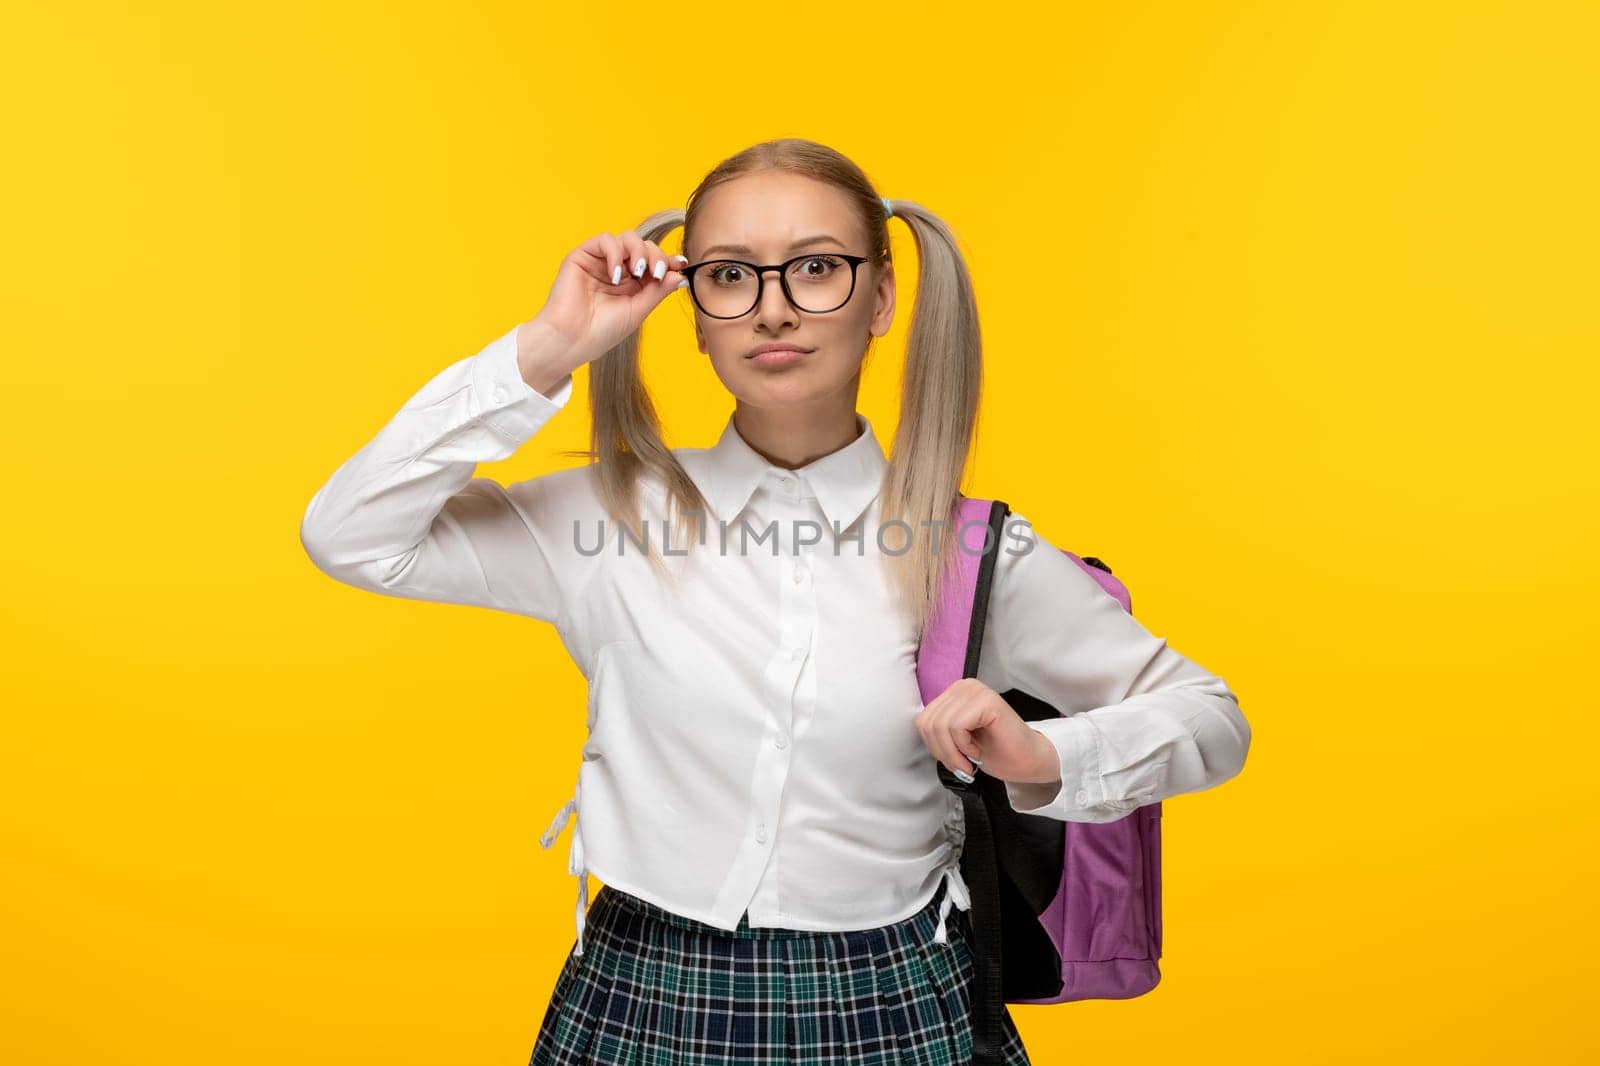 world book day young schoolgirl with glasses wearing uniform with pink backpack